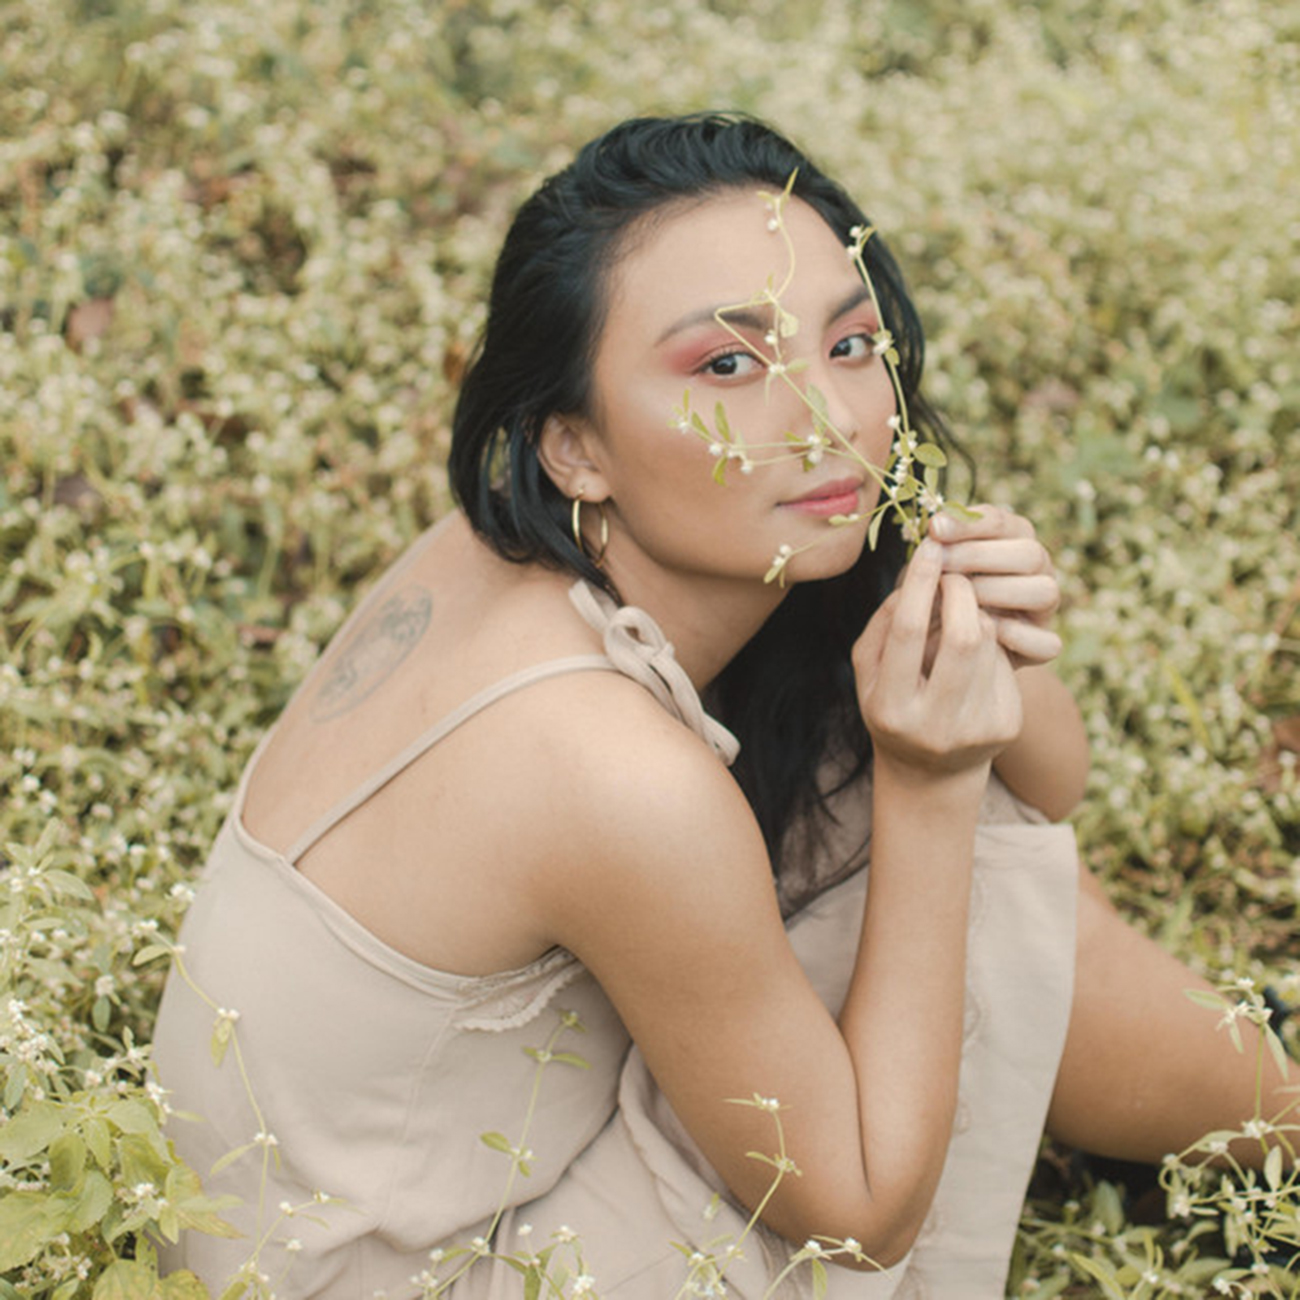 LEAH HALILI SHARES ROMANTIC JOURNEY ON DEBUT SINGLE, FOURTH OF JULY